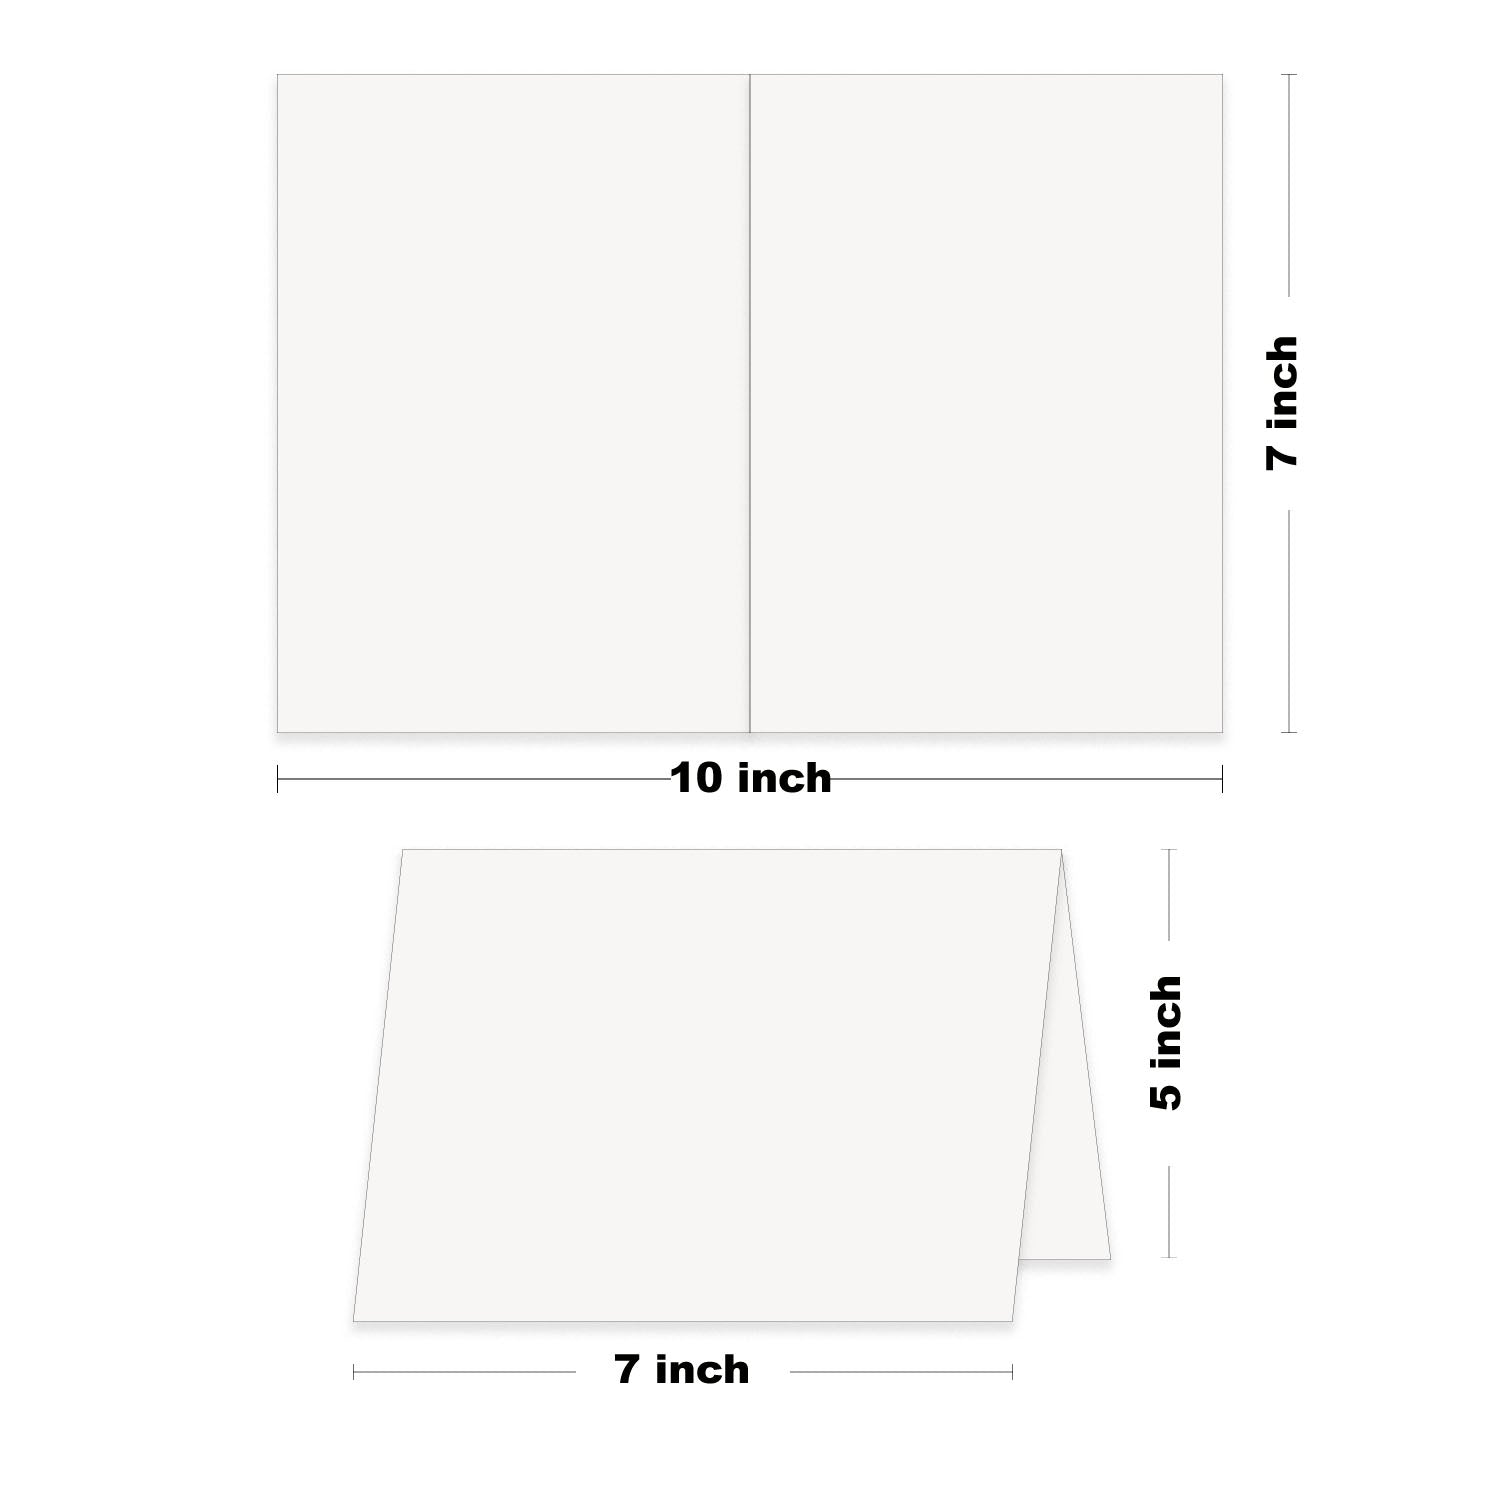 Blank 5x7 Gray Tone Cards and envelopes for artist card making